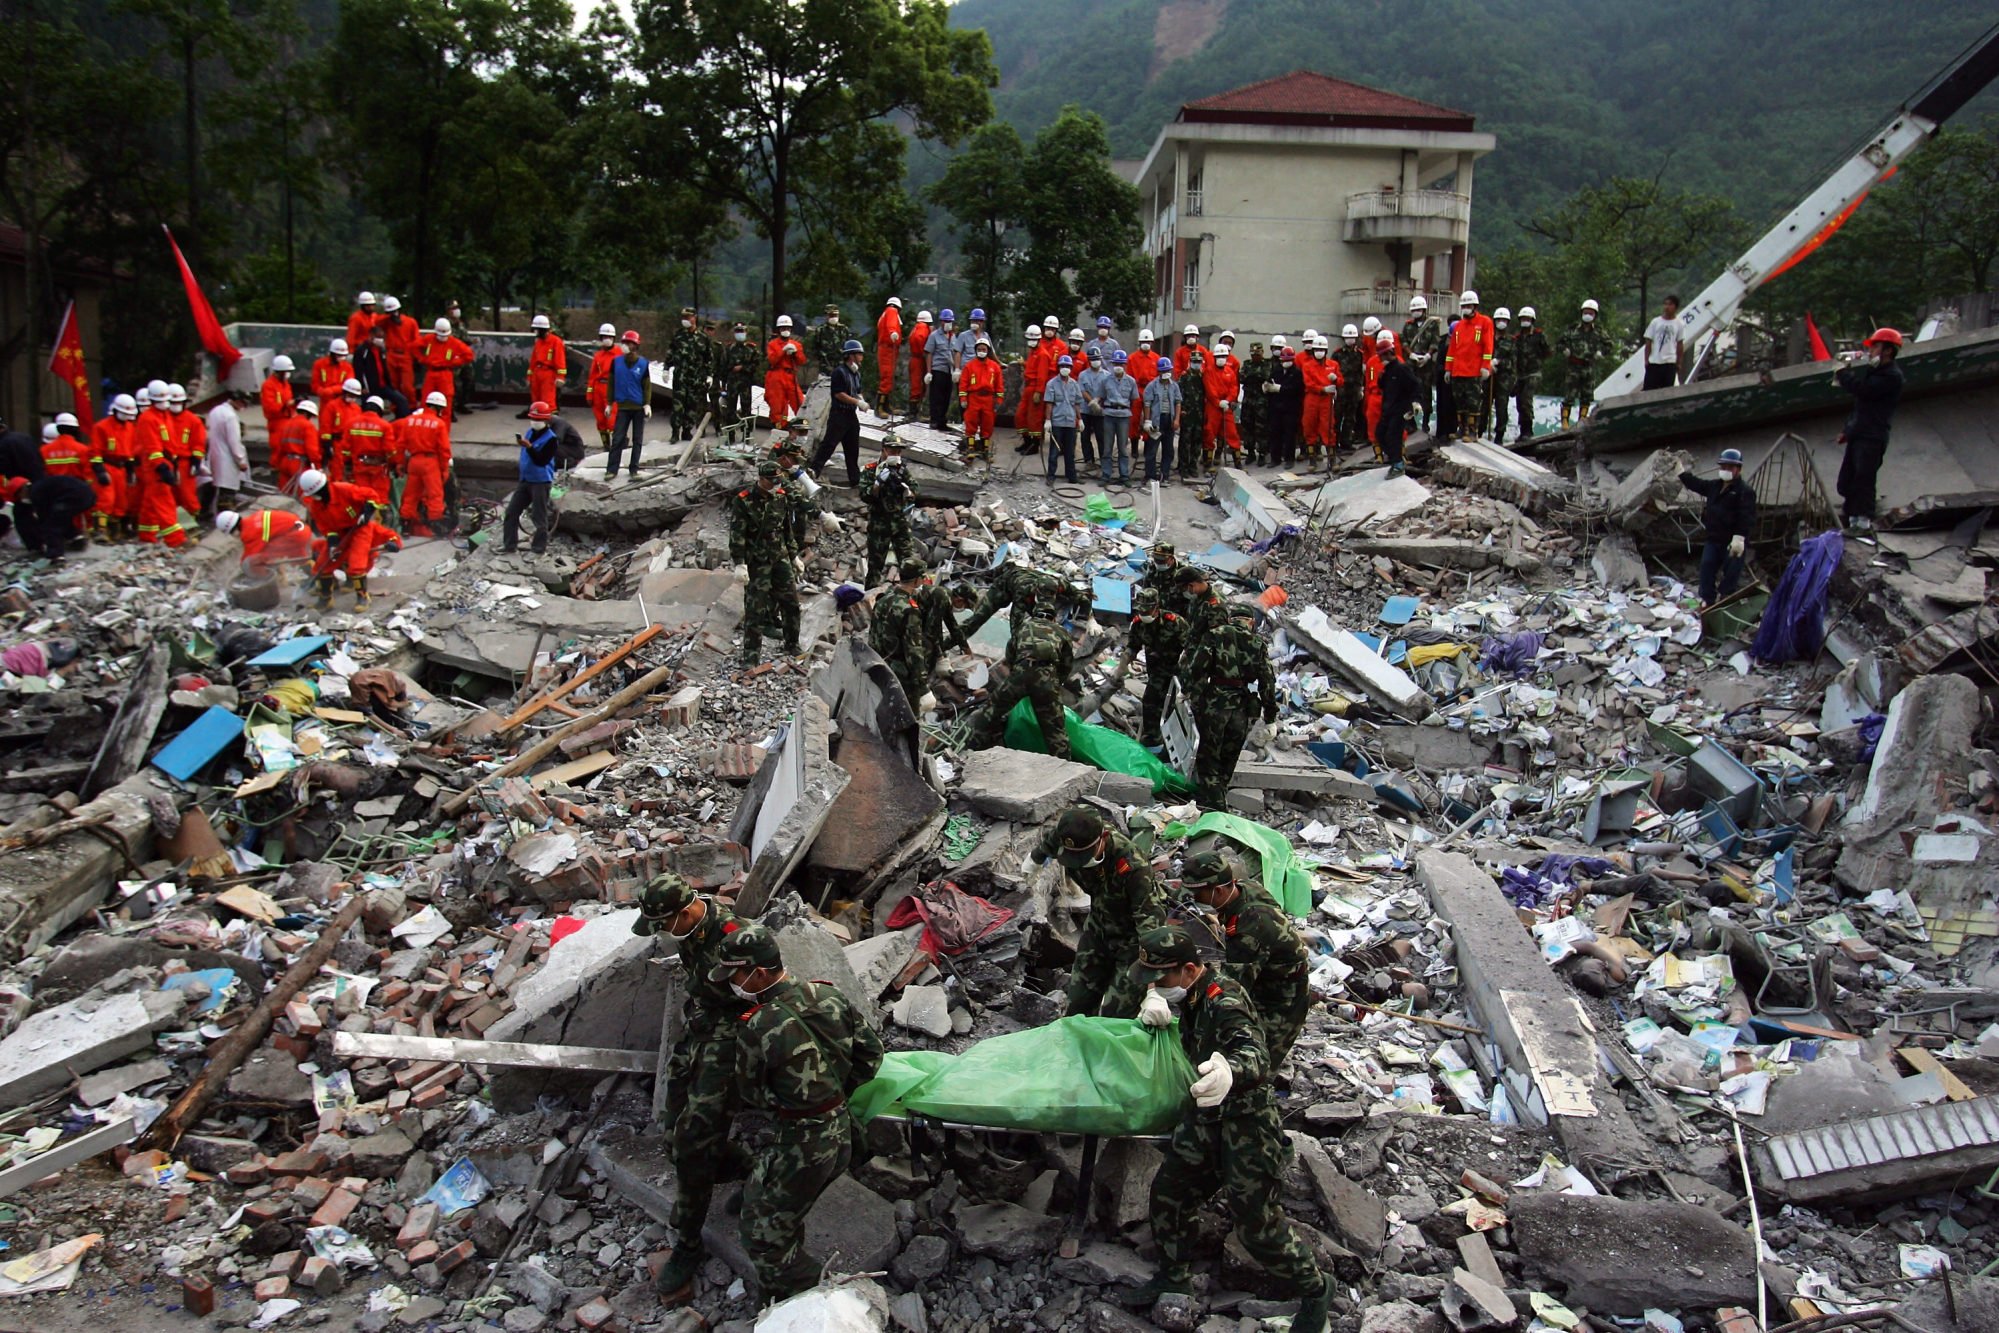 Tens of thousands of people lost their lives when the earthquake struck Wenchuan County in southwestern China in May 2008. Photo: Guang Niu/Getty Images